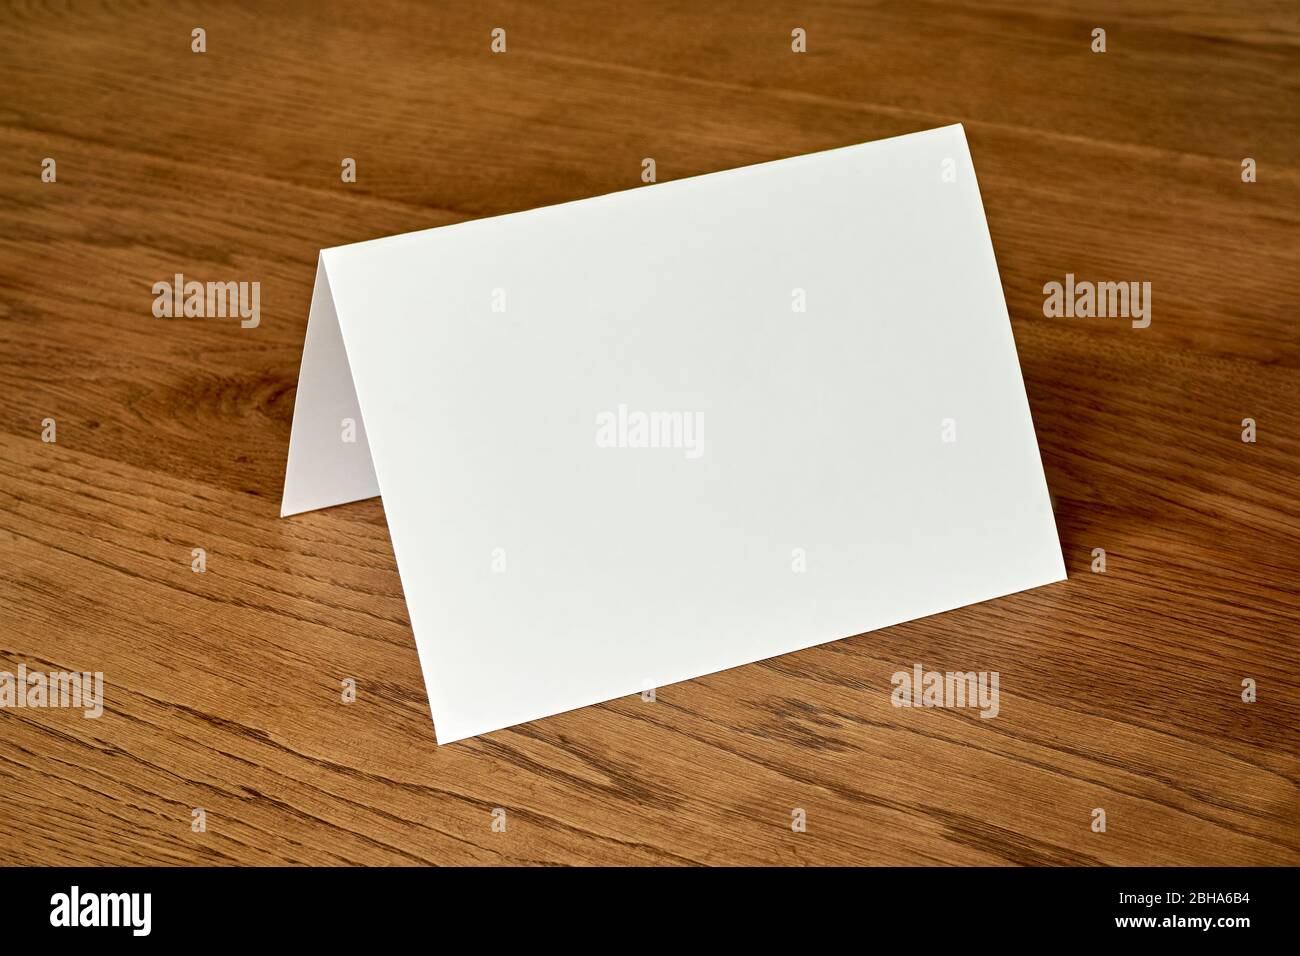 Standing Blank Empty Greeting Card Mock Up On Dark Wooden Background For Use As A Christmas Birthday Wedding Or Celebration Background Template Stock Photo Alamy